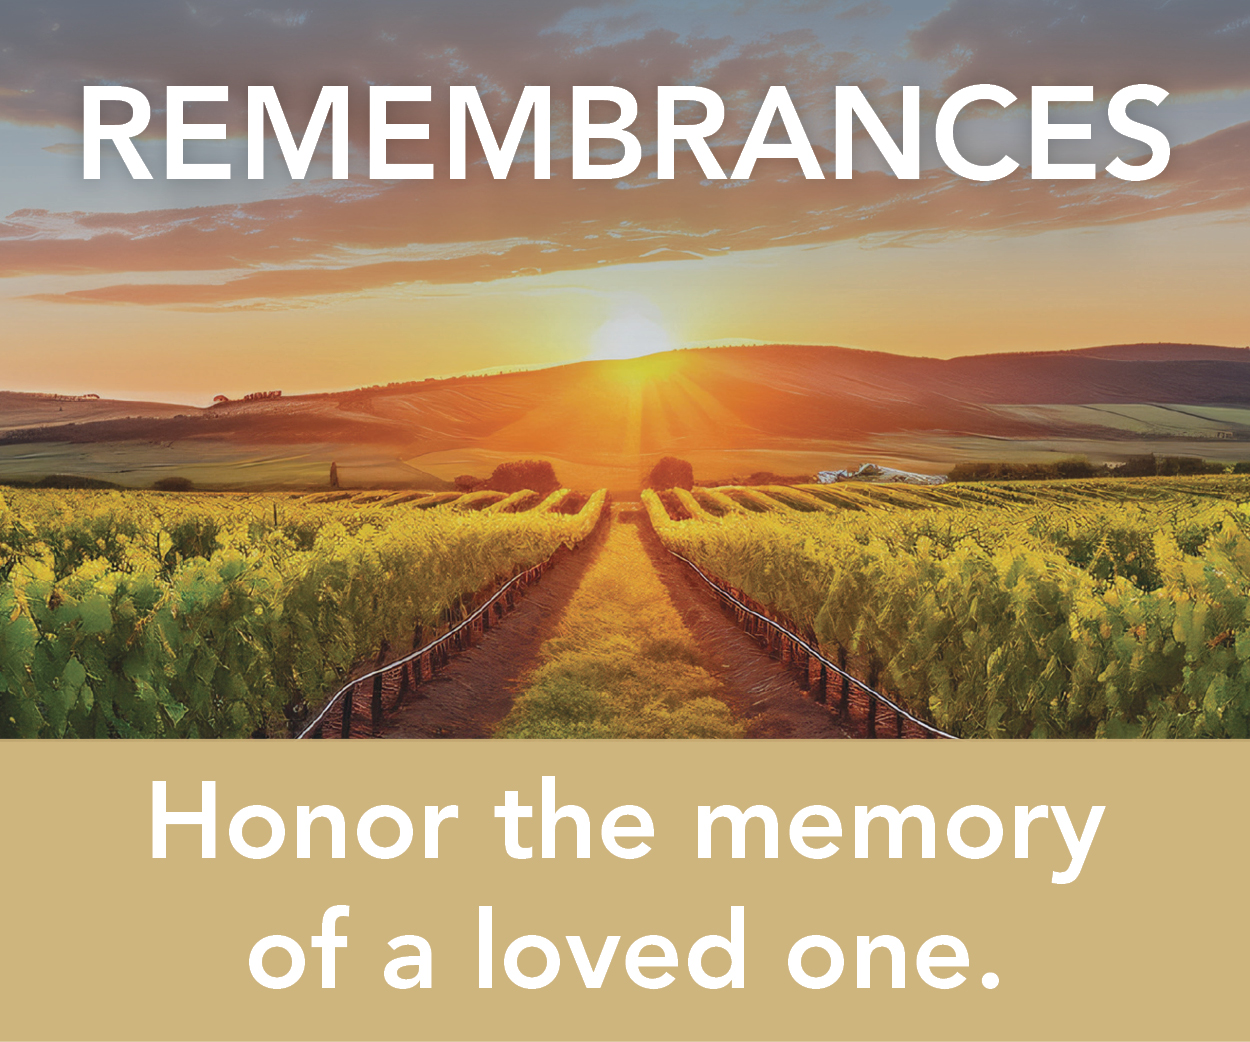 Share their Legacy with the Ag Community - Learn More